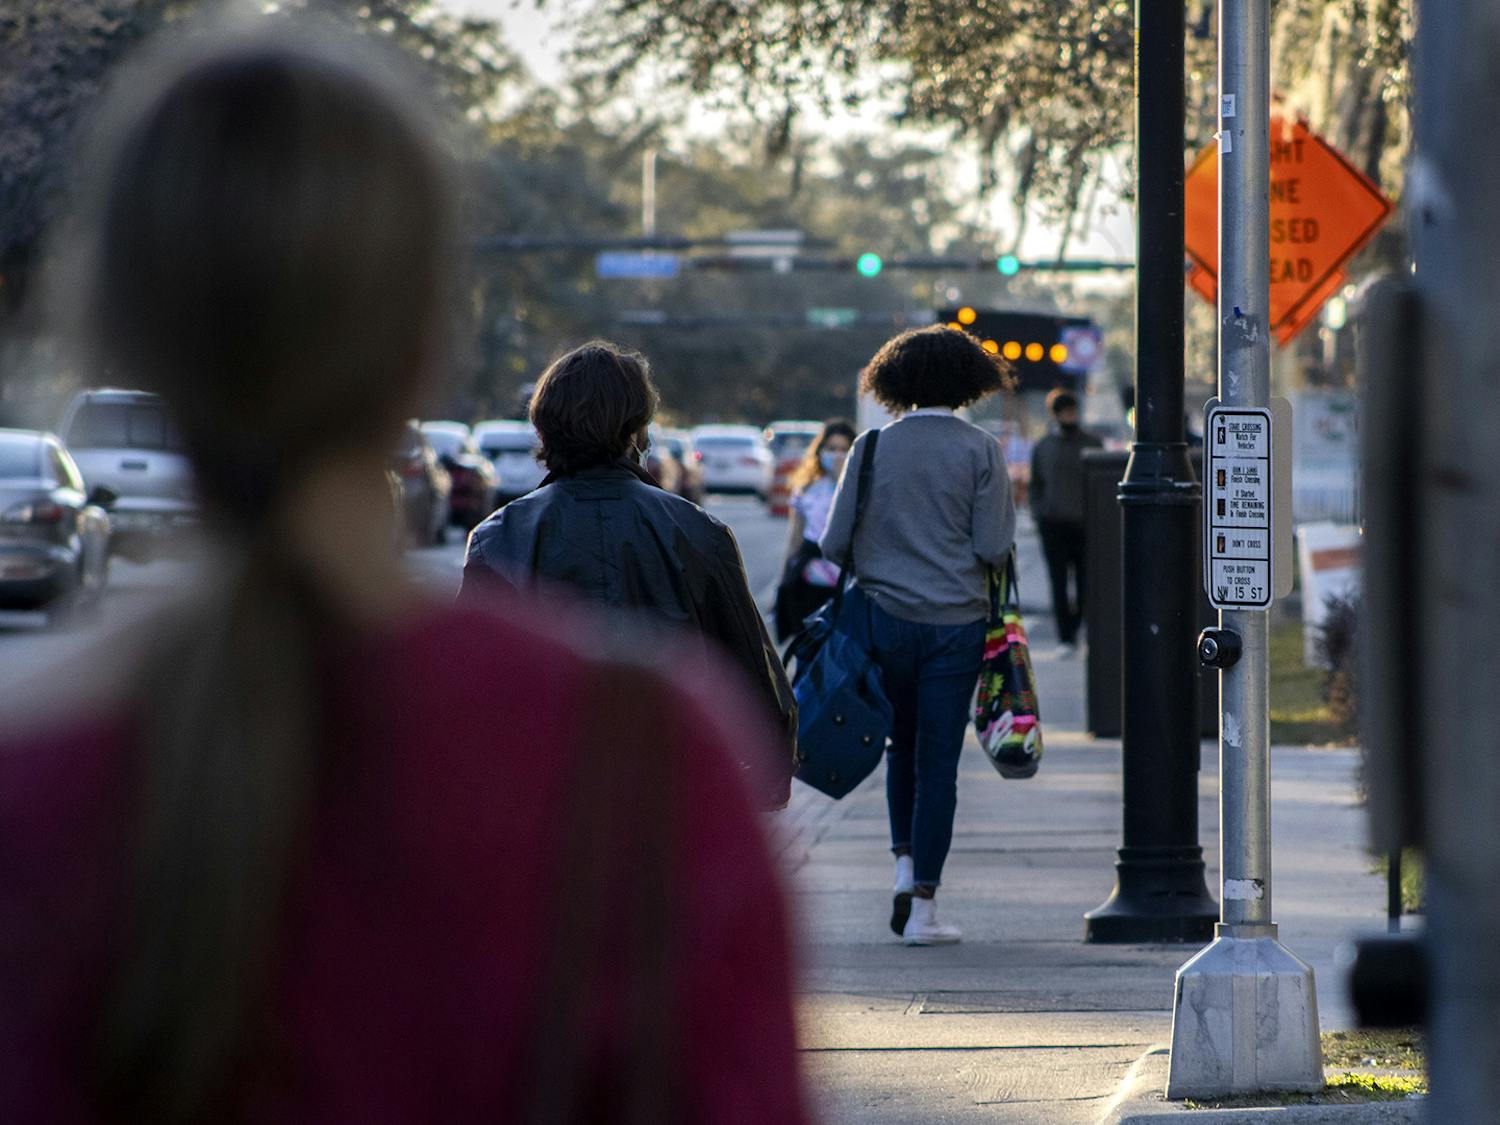 Pedestrians walk down West University Avenue on Wednesday, Feb. 3, 2021. Signs down the road redirect traffic due to ongoing construction on the road, near UF campus and Midtown.